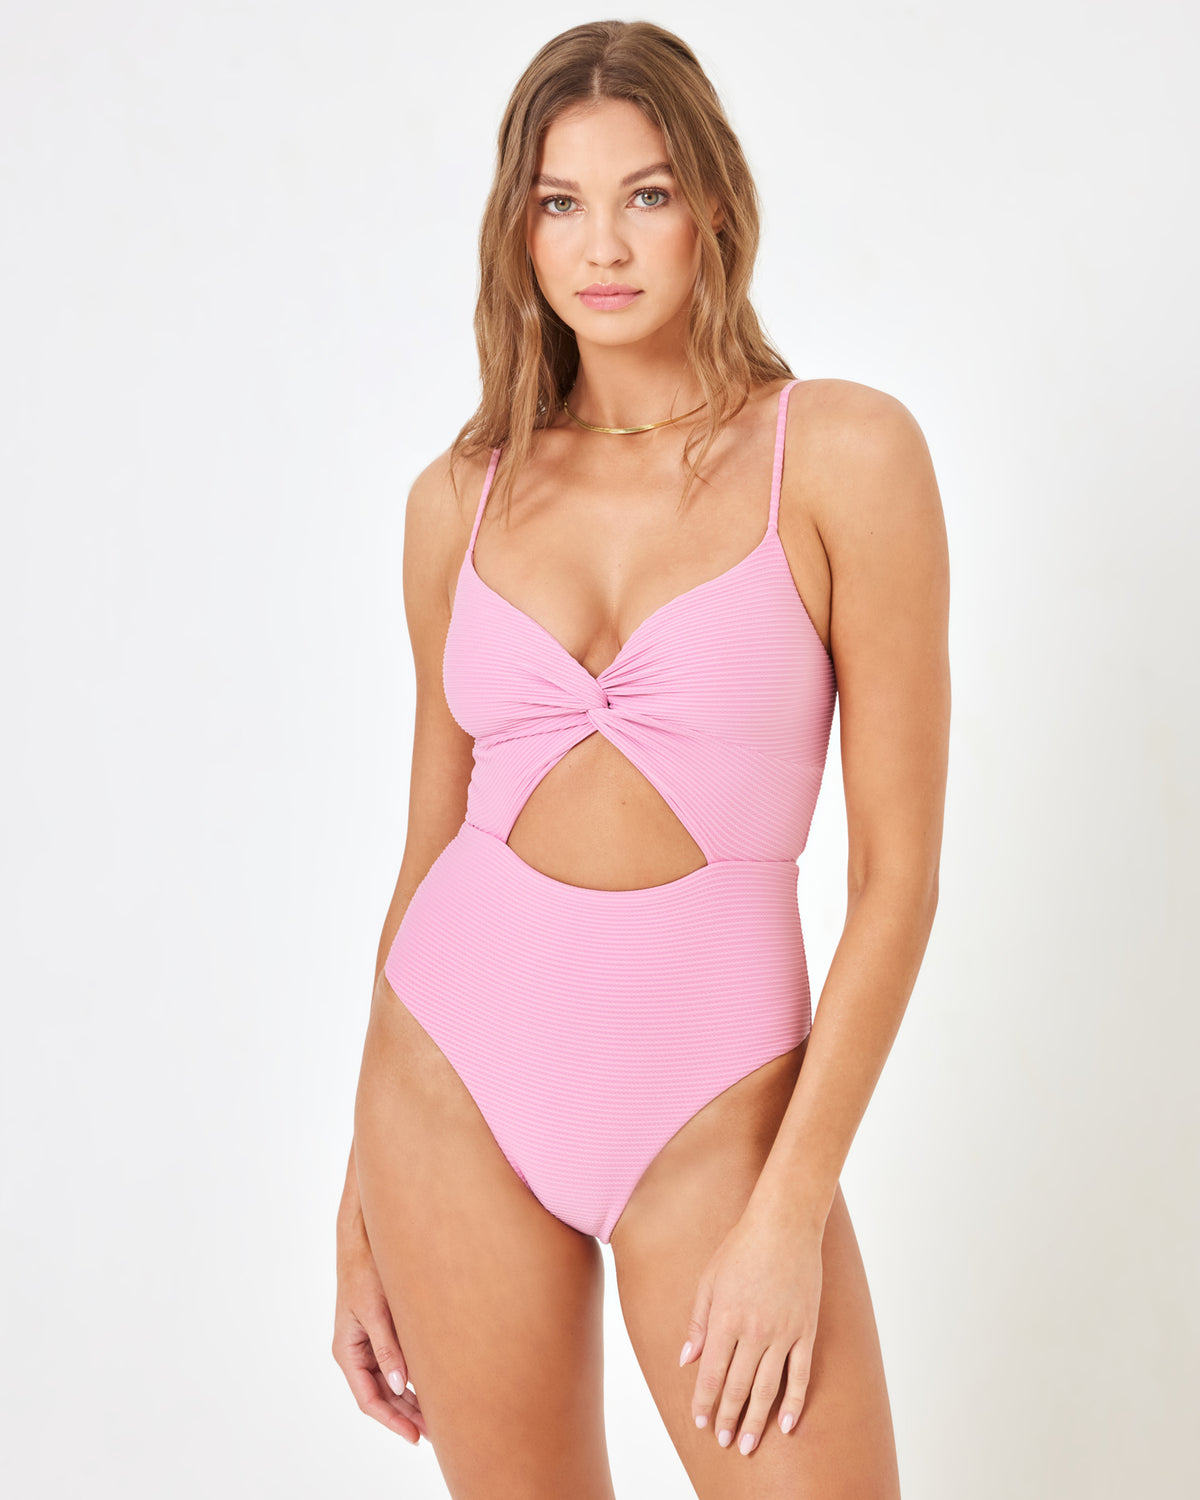 LSPACE X Anthropologie Kyslee One Piece Swimsuit - Pink Lady Pink Lady | Model: Daria (size: S) | Hover